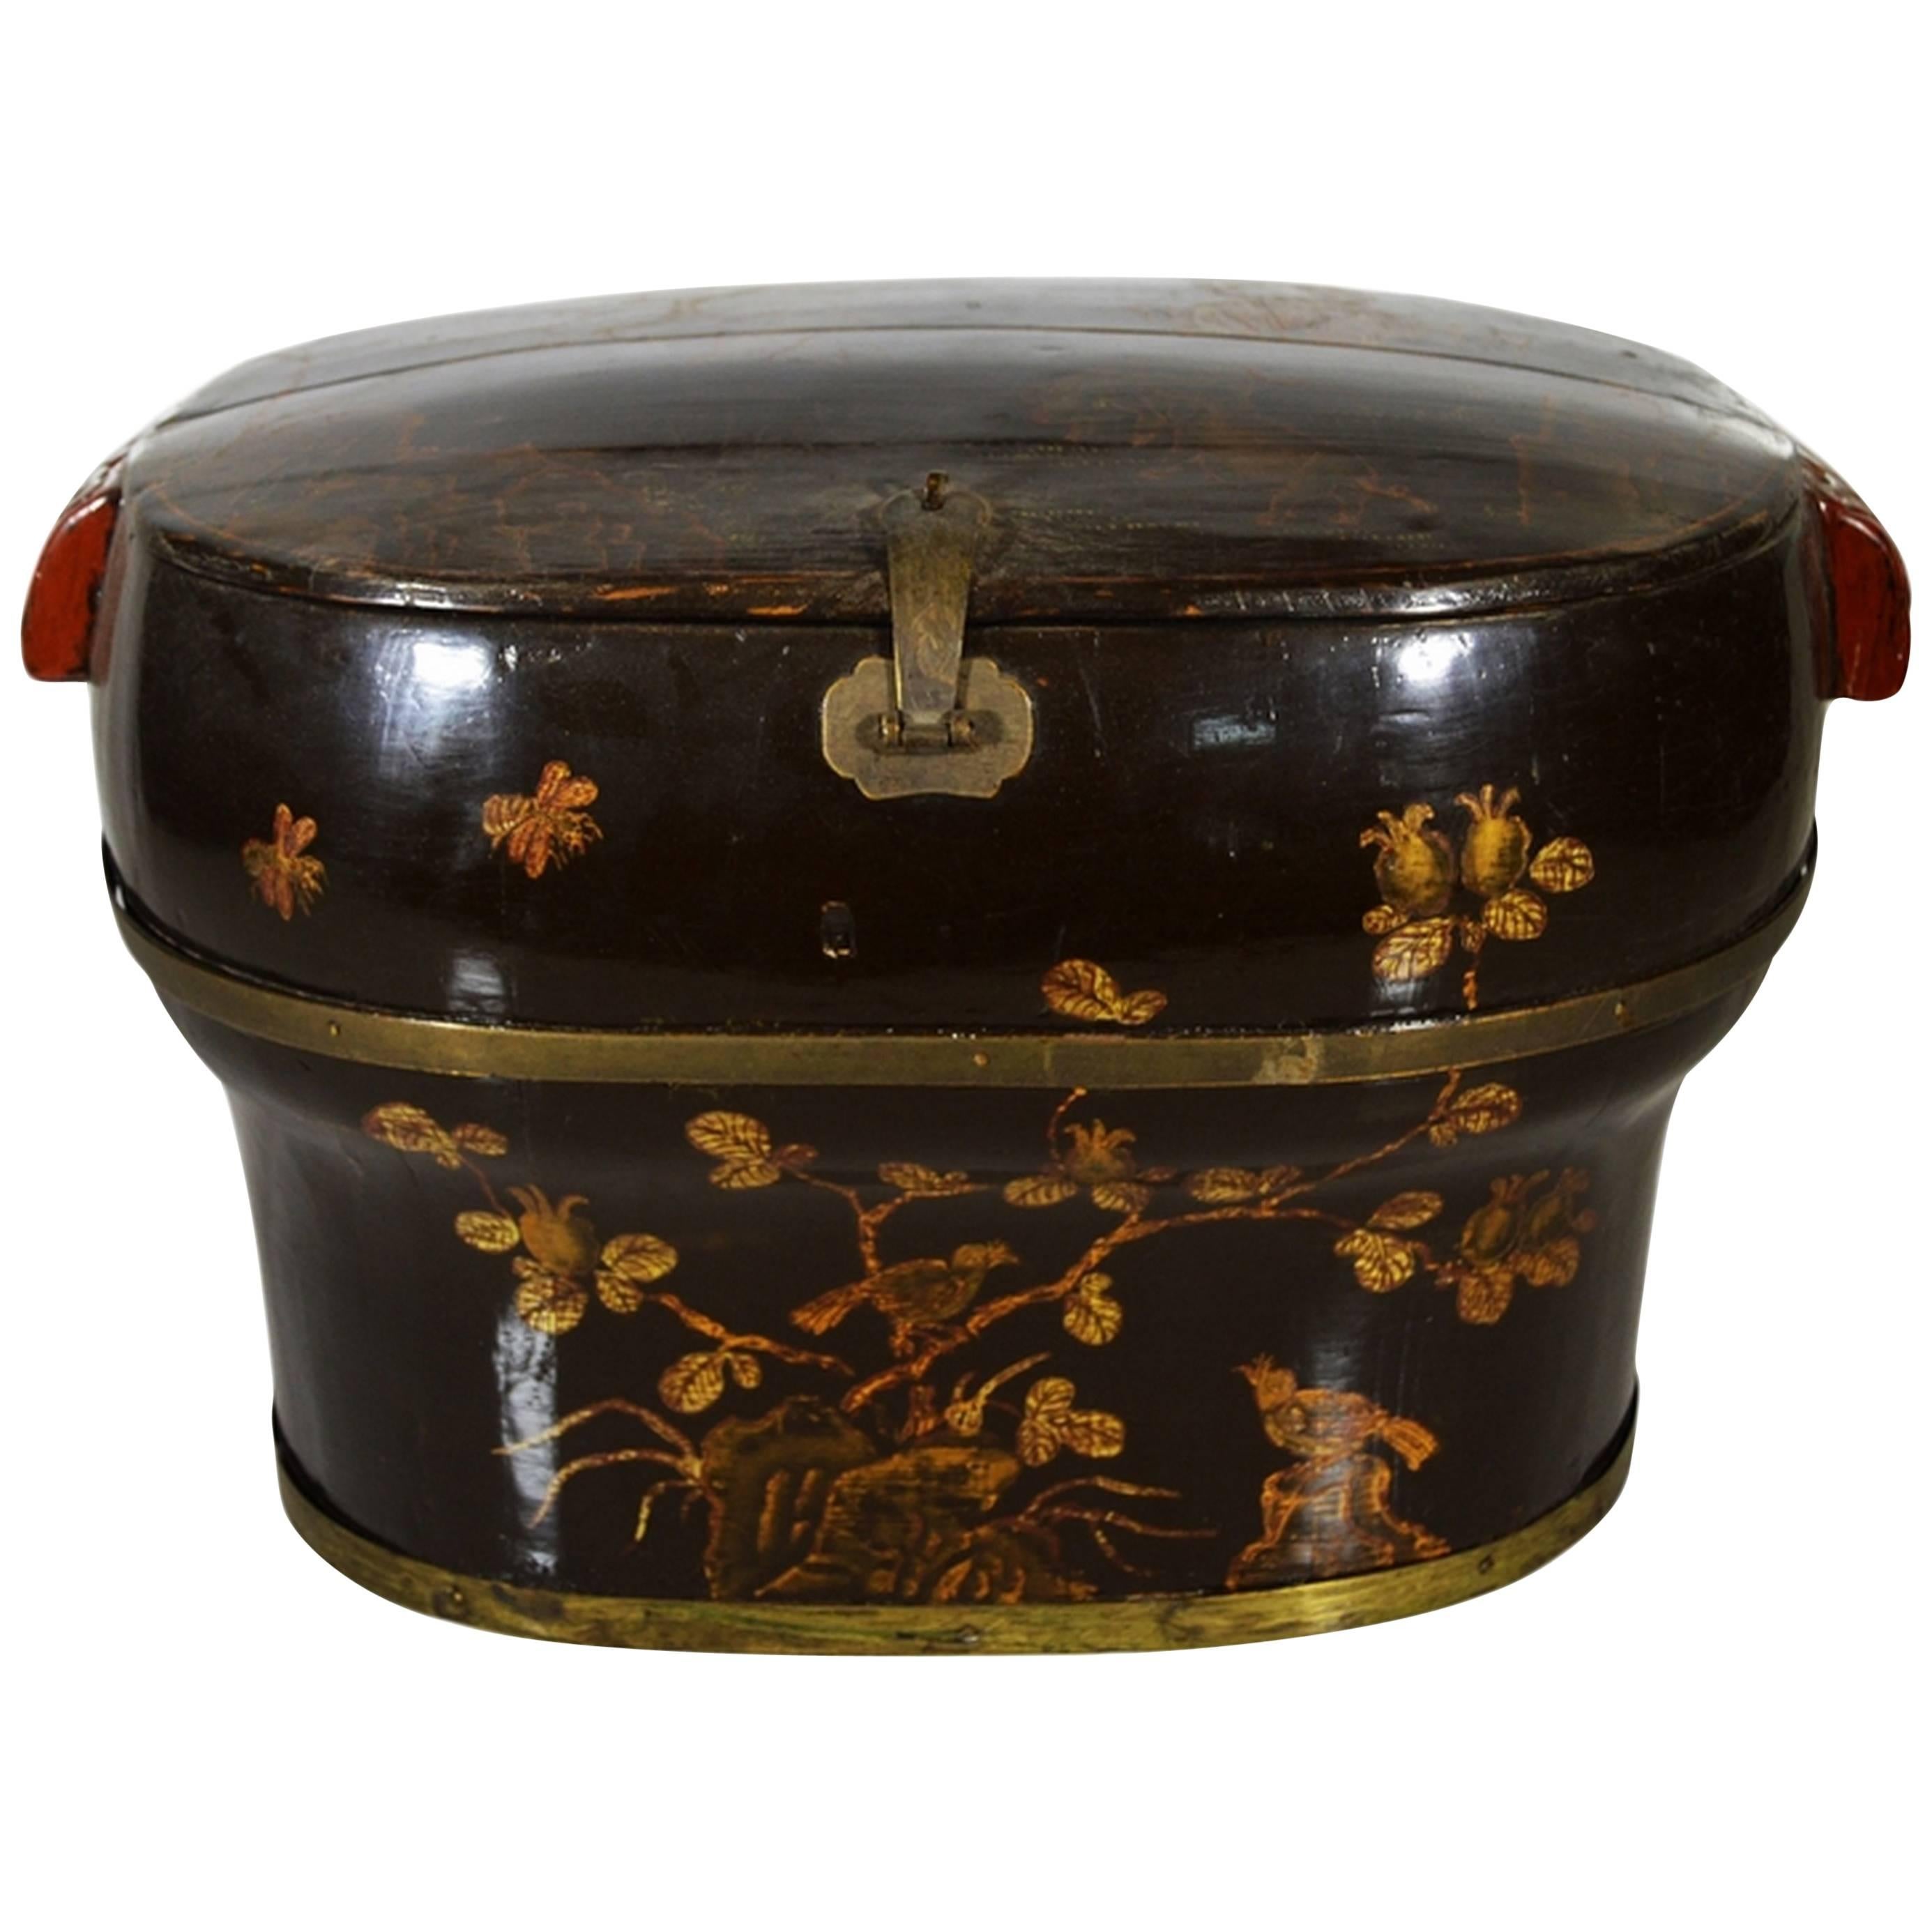 Hand-Painted and Lacquered Wedding Box with Flowers from, China, 19th Century